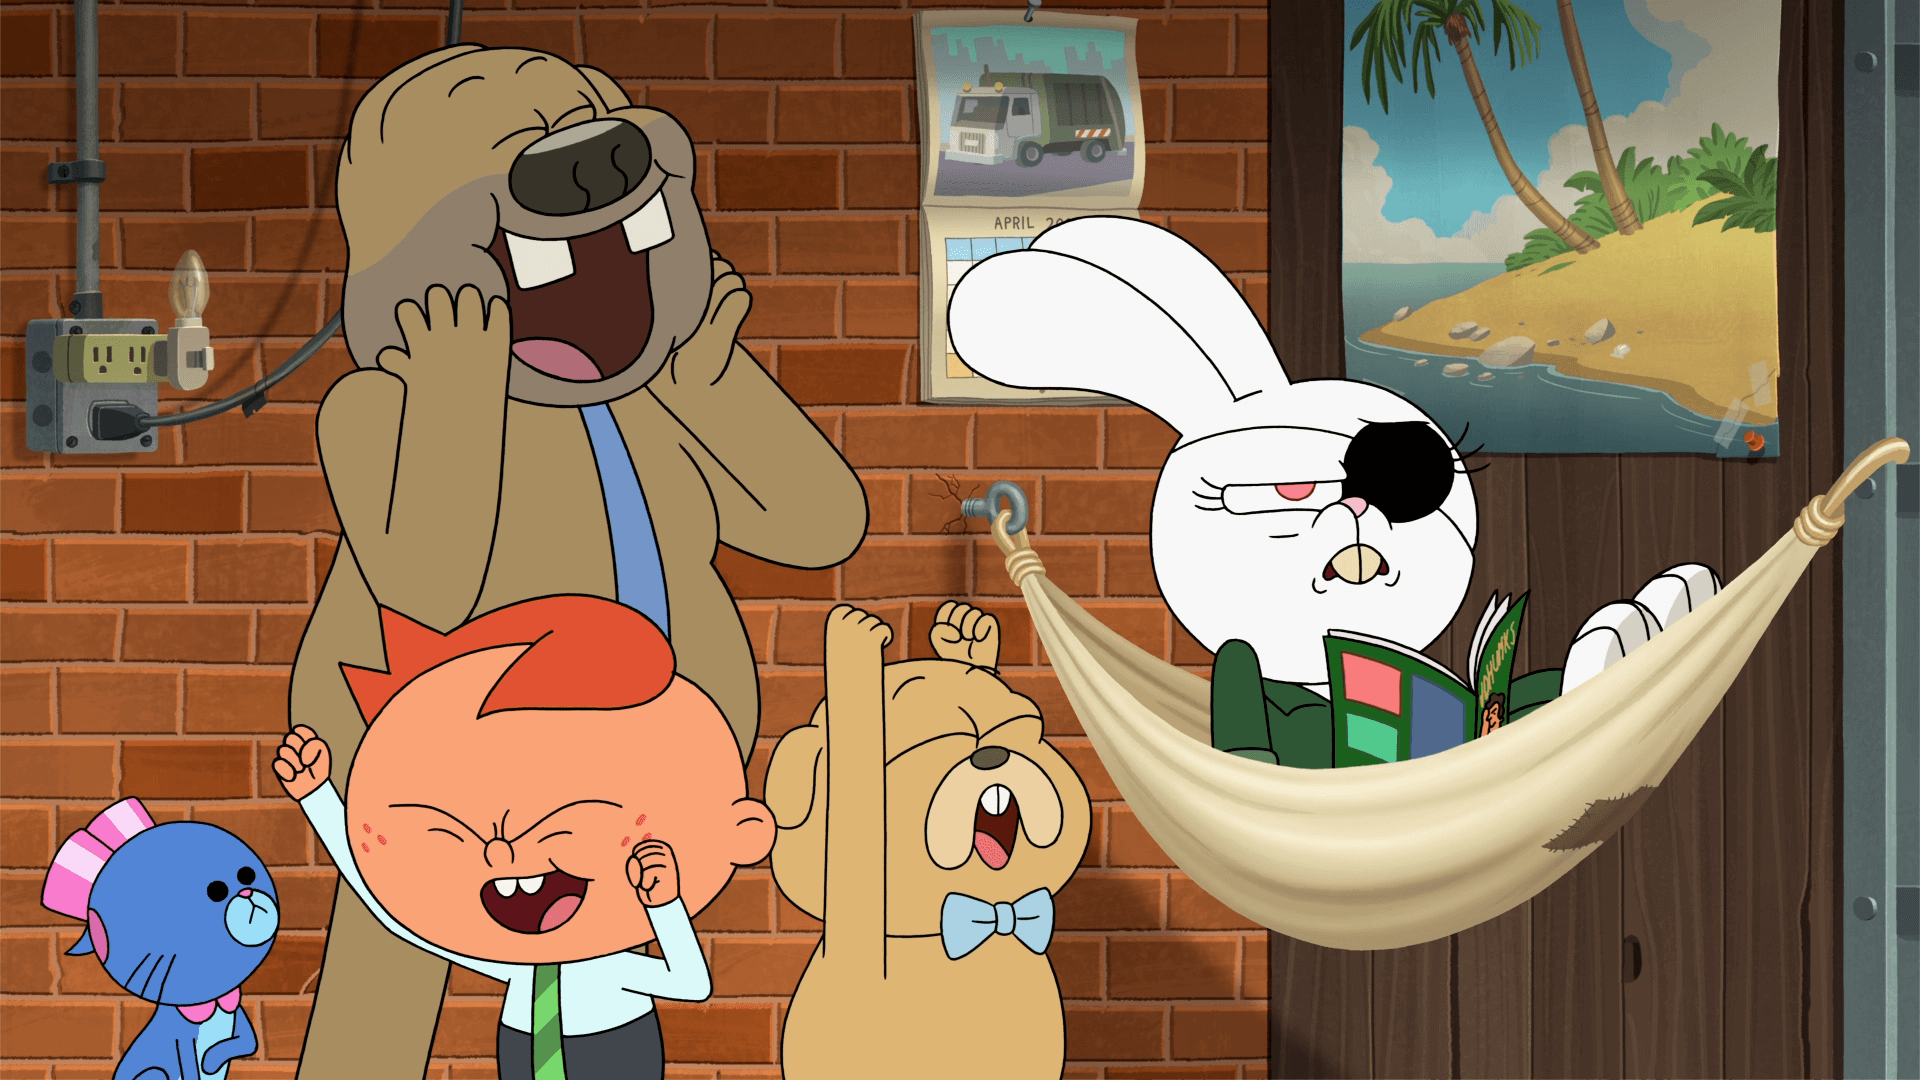 cartoon characters Boss dog, Nuritza rabbit, Tiggy and Gweeseek the cat celebrate and yell in a scene from HBOMax's Tig N Seek edited by Todd Bishop